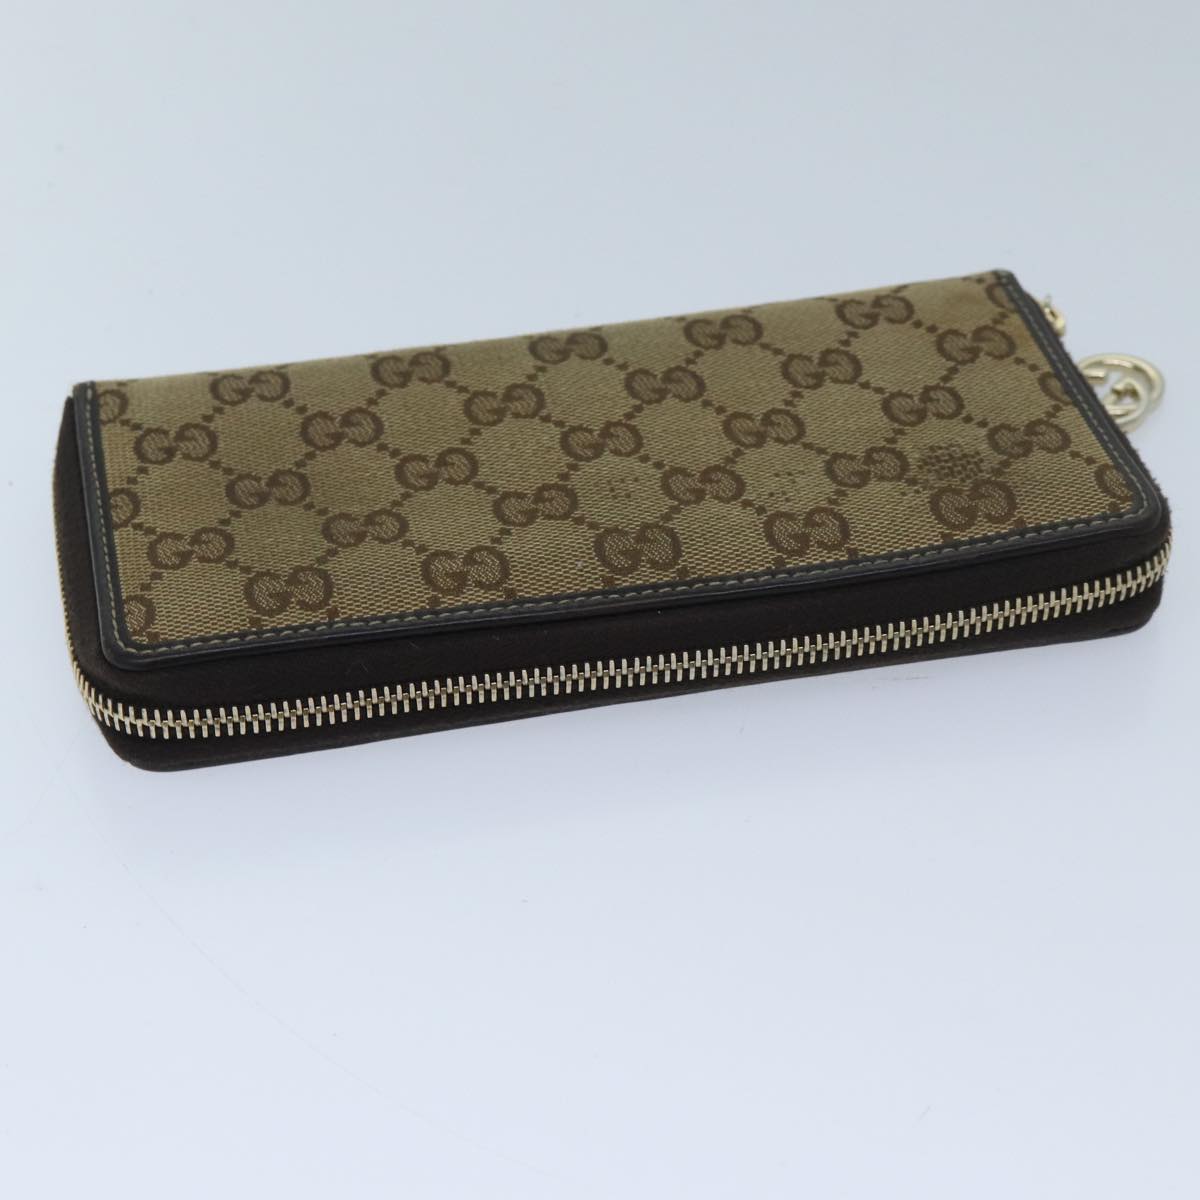 GUCCI GG Canvas Long Wallet Beige 212120 Auth ep3877